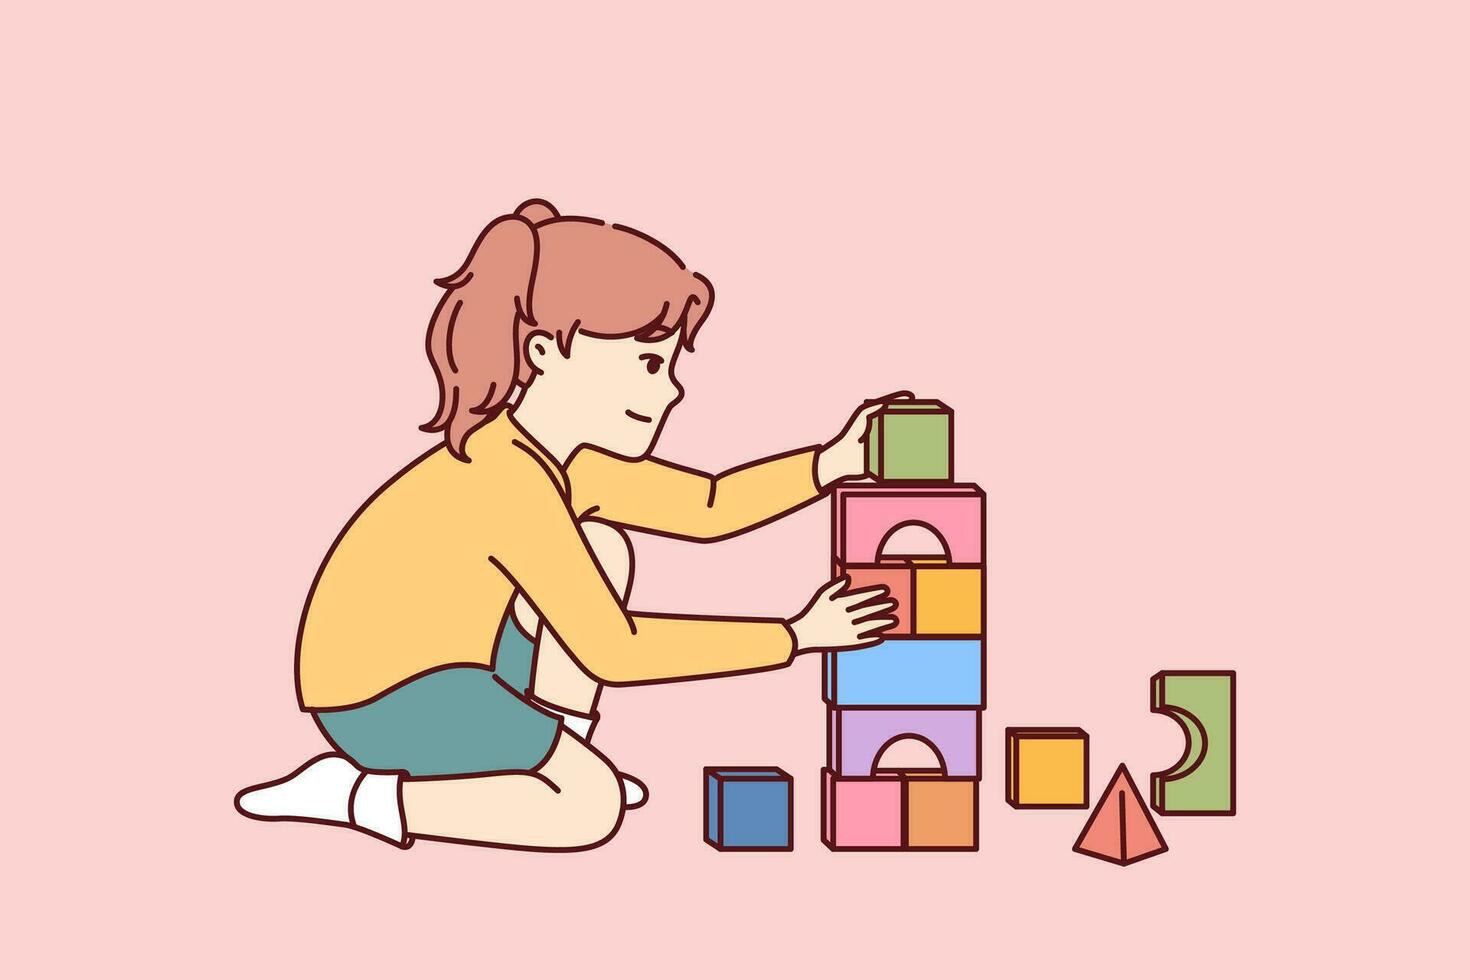 Little girl plays sitting on floor and builds toy bricks tower for concept of educational games for children. Child uses plastic or wooden toy bricks enjoying creation of pyramids. vector